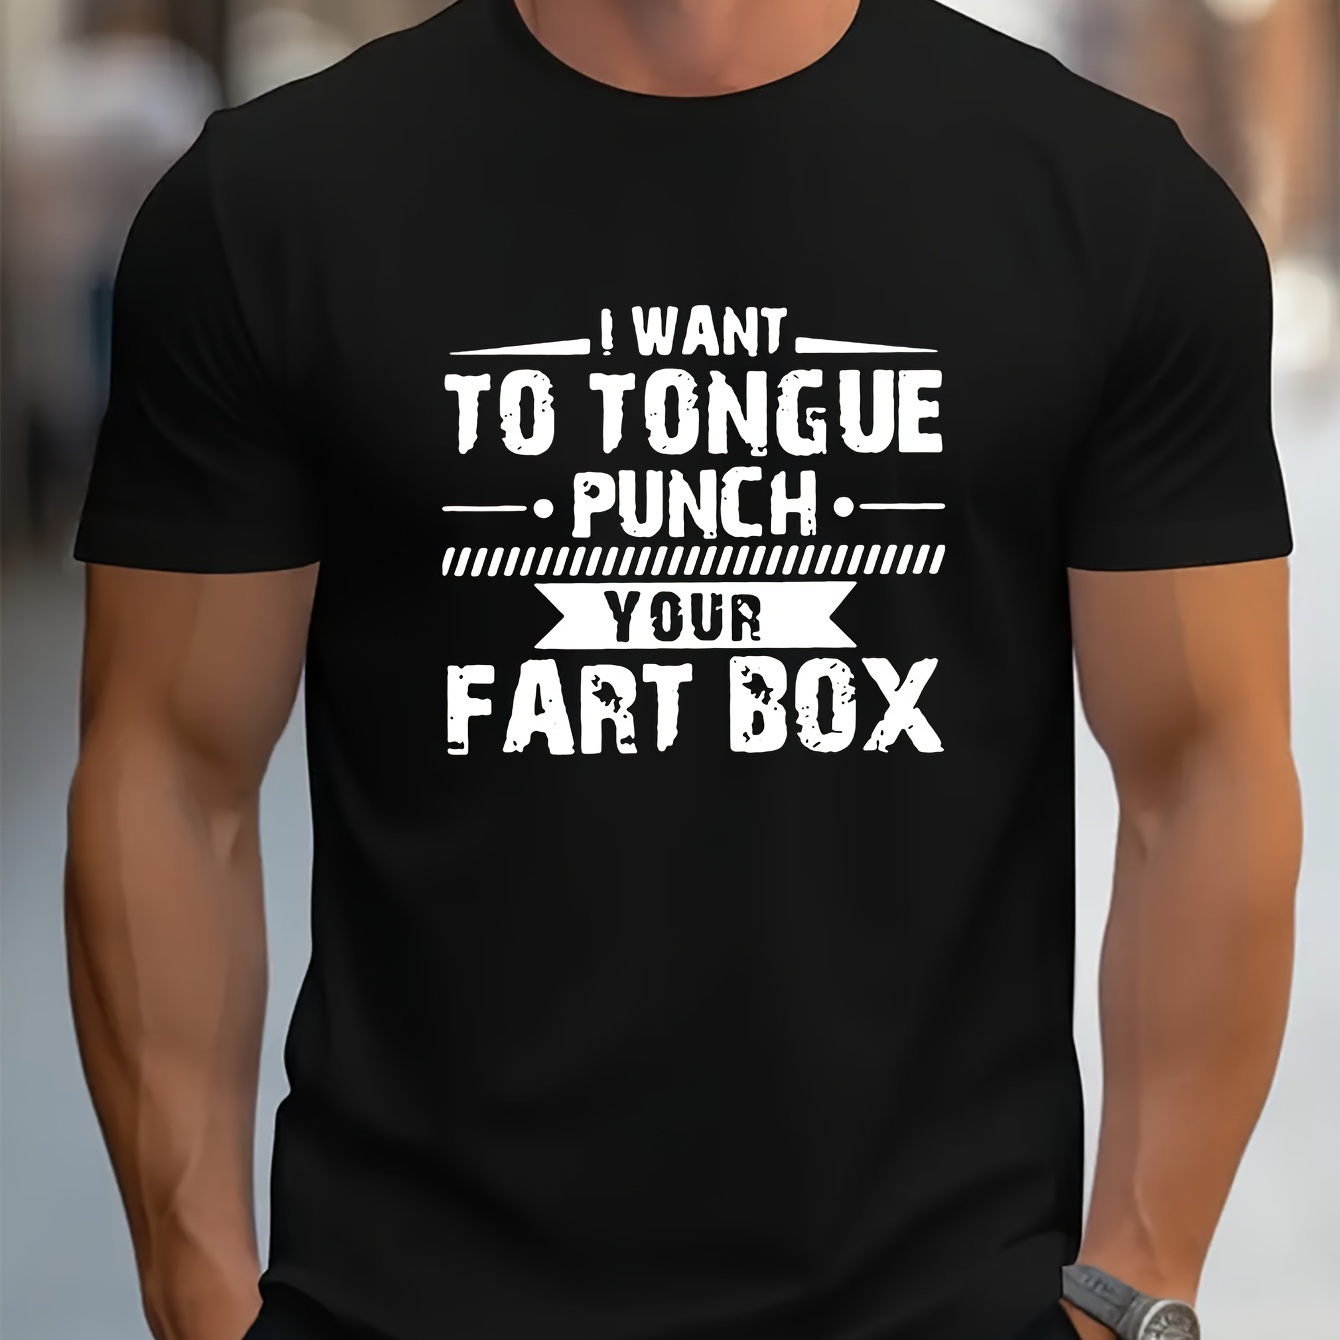 

I Want To Your Fart Box" Creative Print Stylish Cotton T-shirt For Men, Casual Summer Top, Comfortable And Fashion Crew Neck Short Sleeve, Suitable For Daily Wear